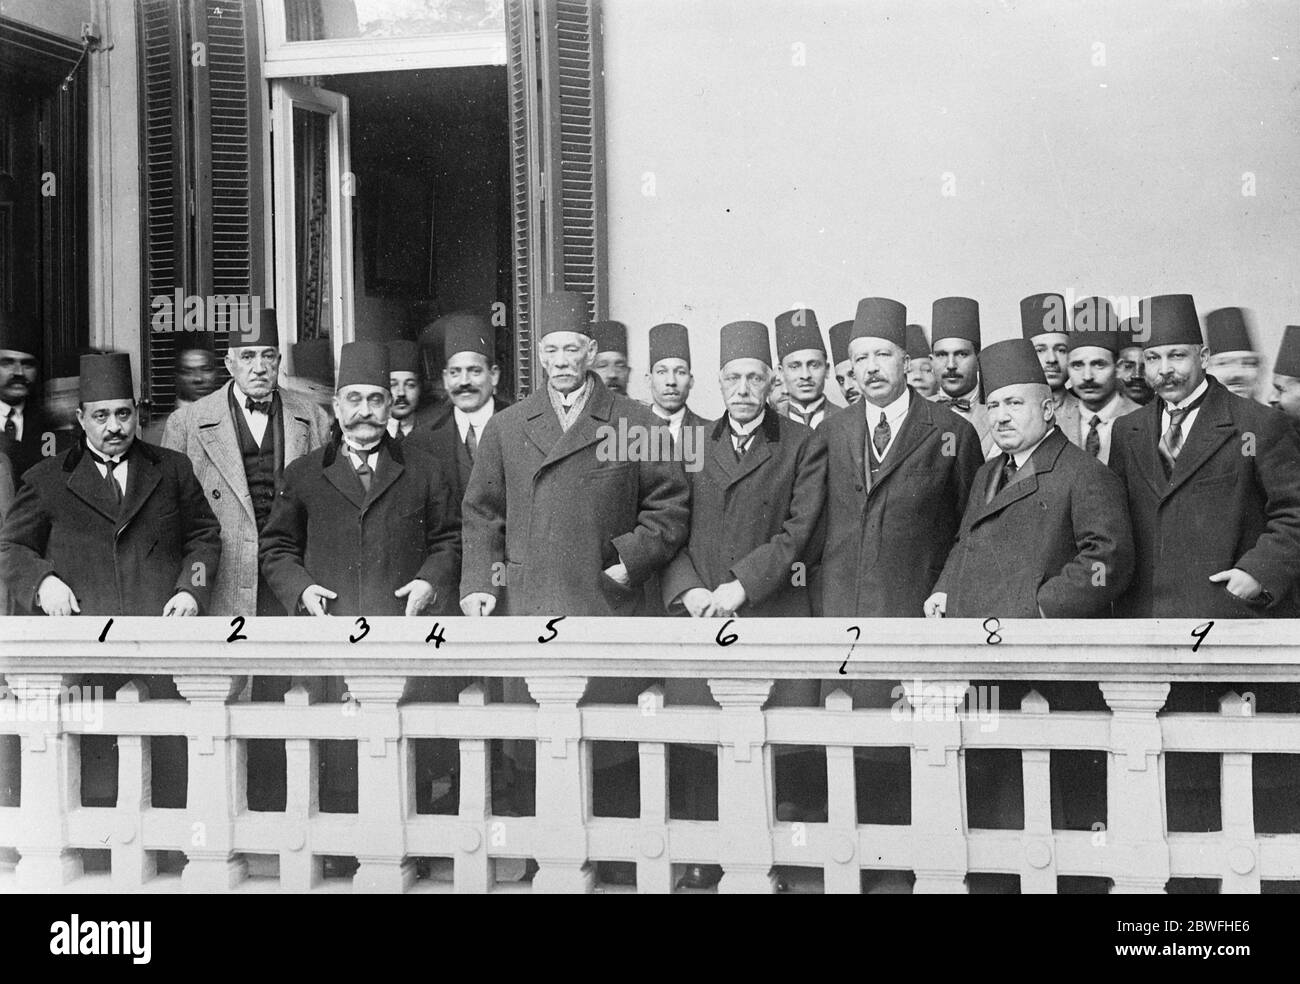 The Zaghloul Pasha Ministry . Left to right : Tewfik Pacha Nassim ( Ministre des Finances ) , Ahmed Mazloum Pasha ( Ministre des Wakfs ) , Mohammed Pasha Said ( Instruction Publique ) , Moustapha Nahas ( Communications ) , Saad Zaghloul Pasha ( President ) , Fathalia Pacha Barakat ( Agriculture ) , Morcos Hanna ( Travaux Publics ) , Hassan Pasha Hassib ( Guerre at Marine ) and Neguib Garabli ( Justice ) . 7 February 1924 Stock Photo